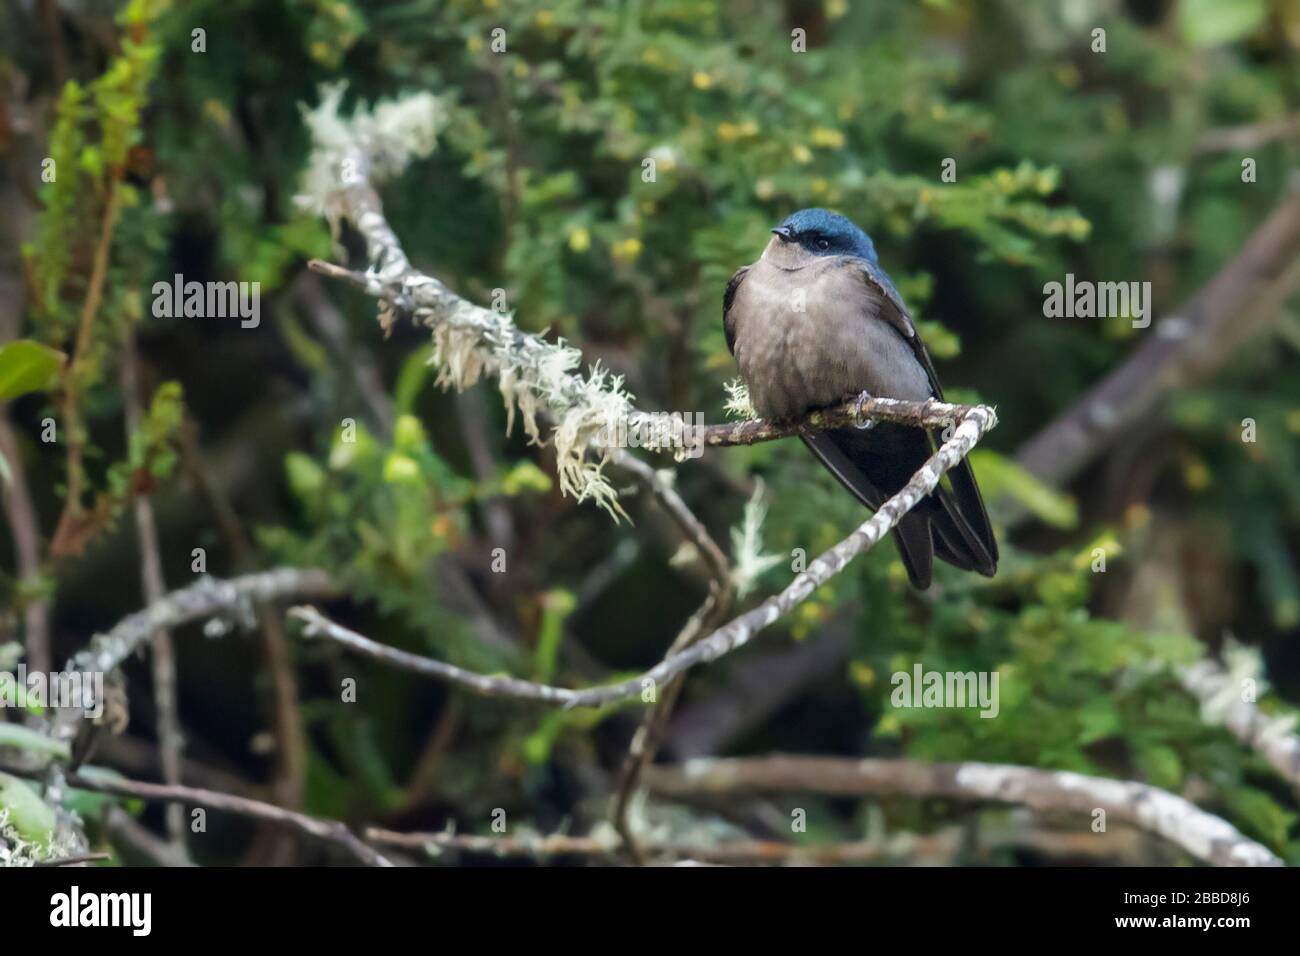 Brown-bellied Swallow (Orochelidon murina) perched on a branch in the Andes mountains in Colombia. Stock Photo